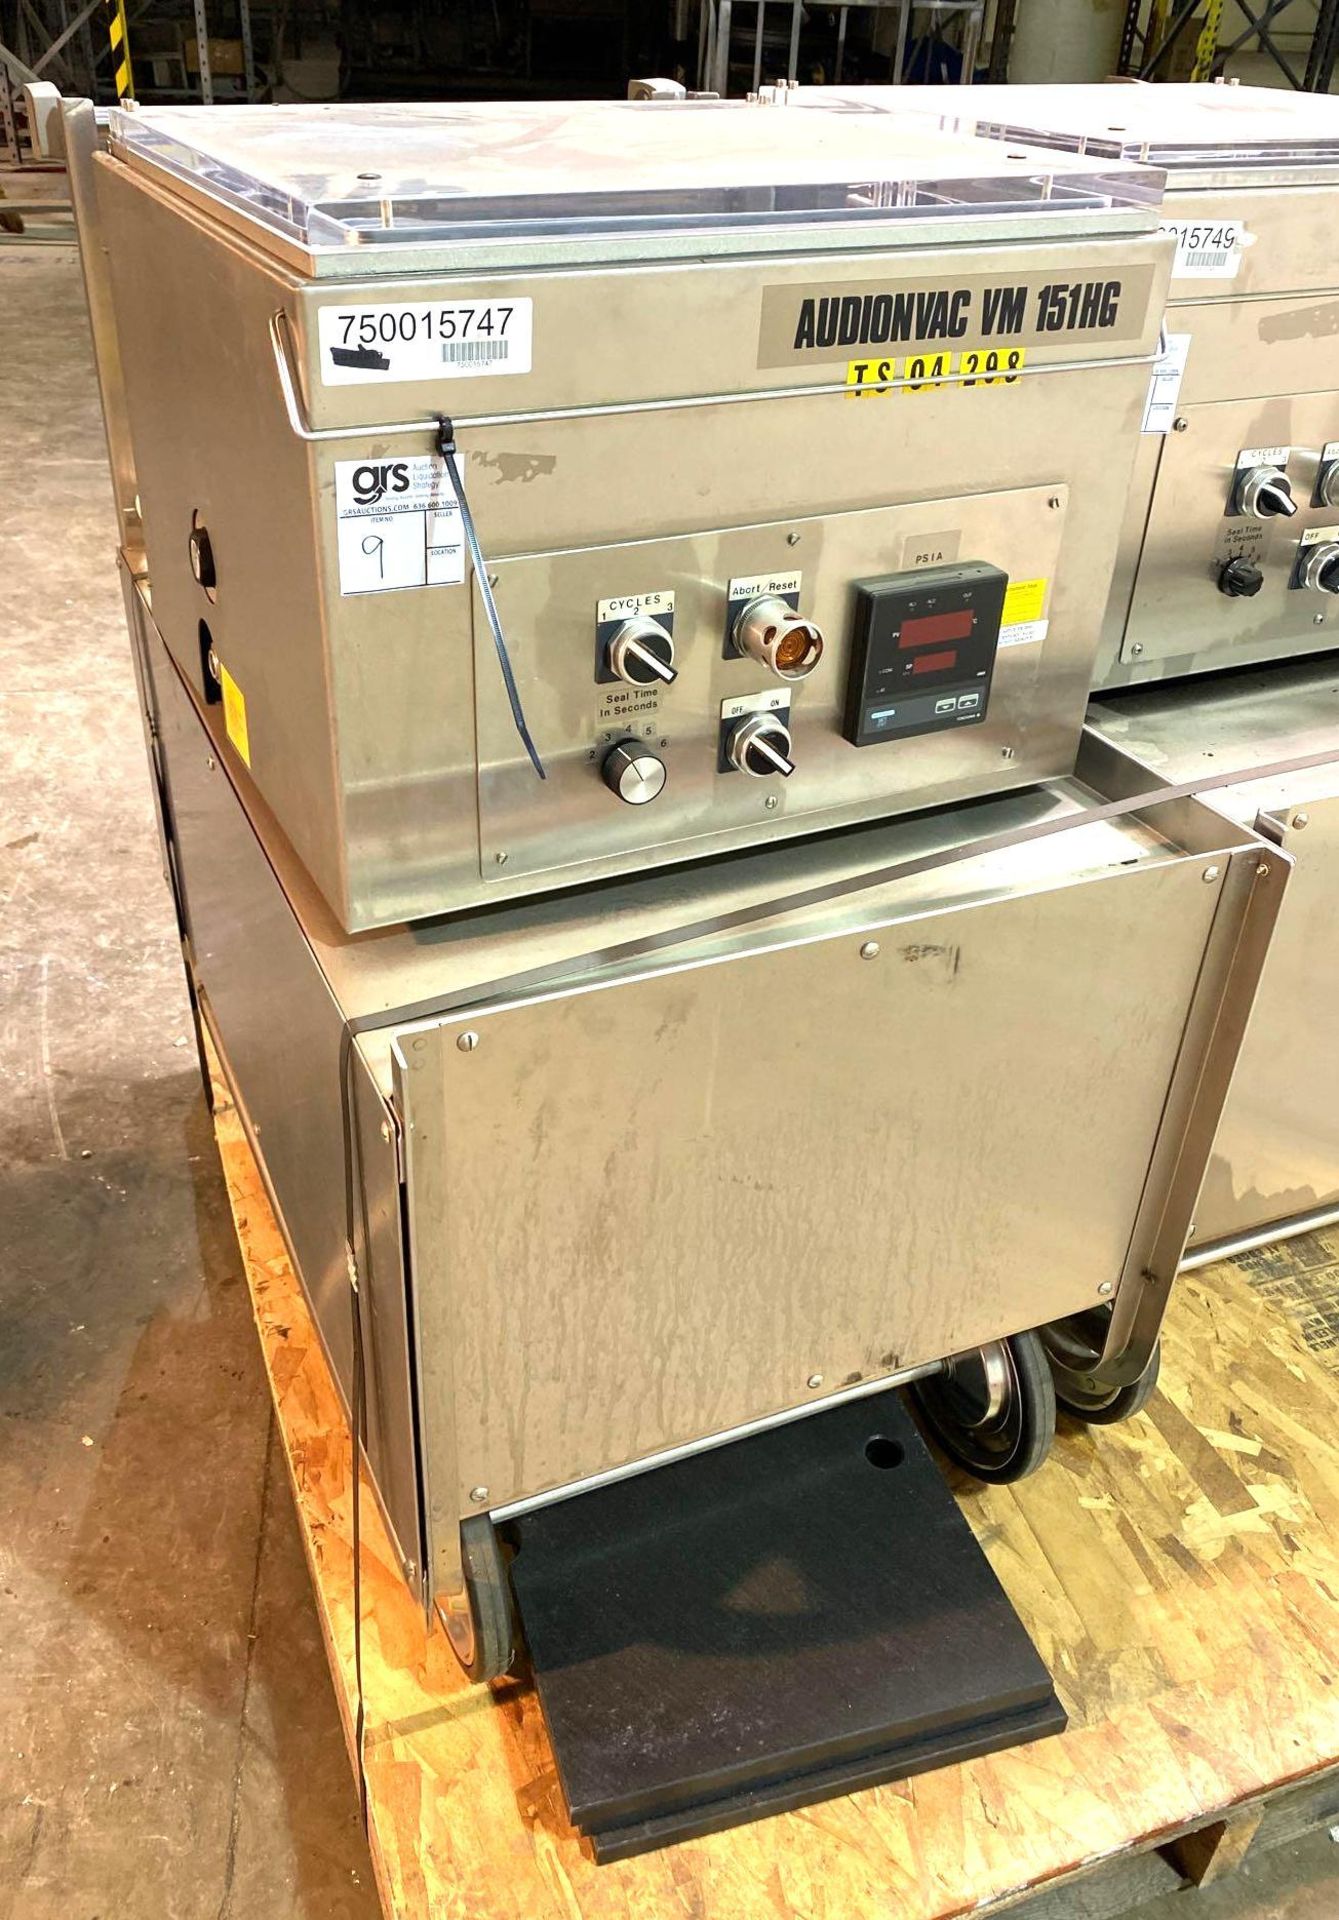 AudionVac VM 151HG - Table Top Vacuum Chamber Packing with Cart